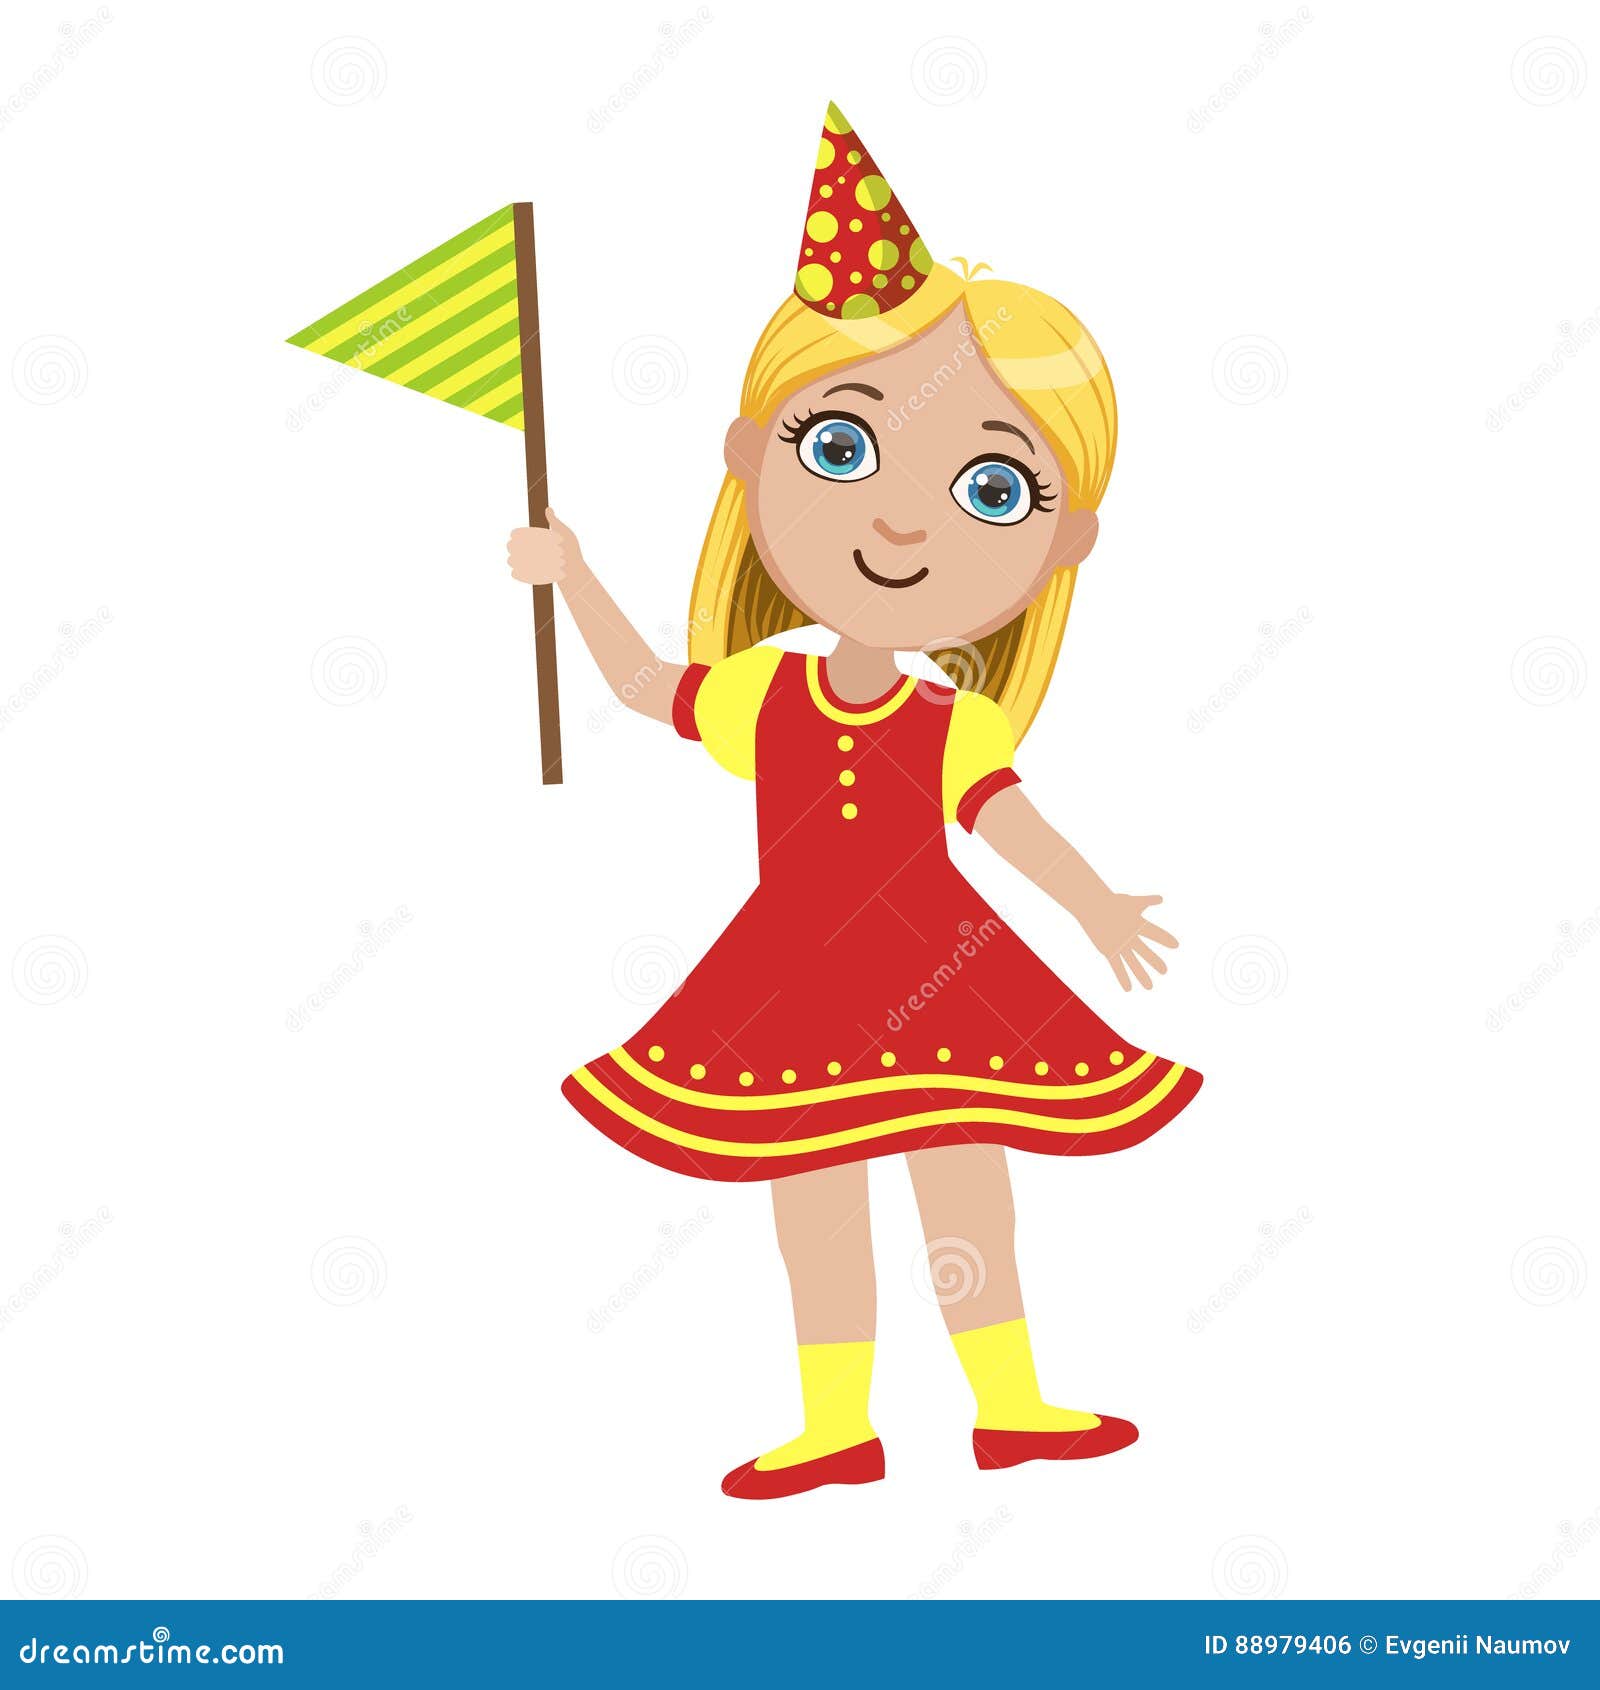 Girl in Red Dress with Flag, Part of Kids at the Birthday Party Set of Cute Cartoon  Characters with Celebration Stock Vector - Illustration of sweet, yellow:  88979406